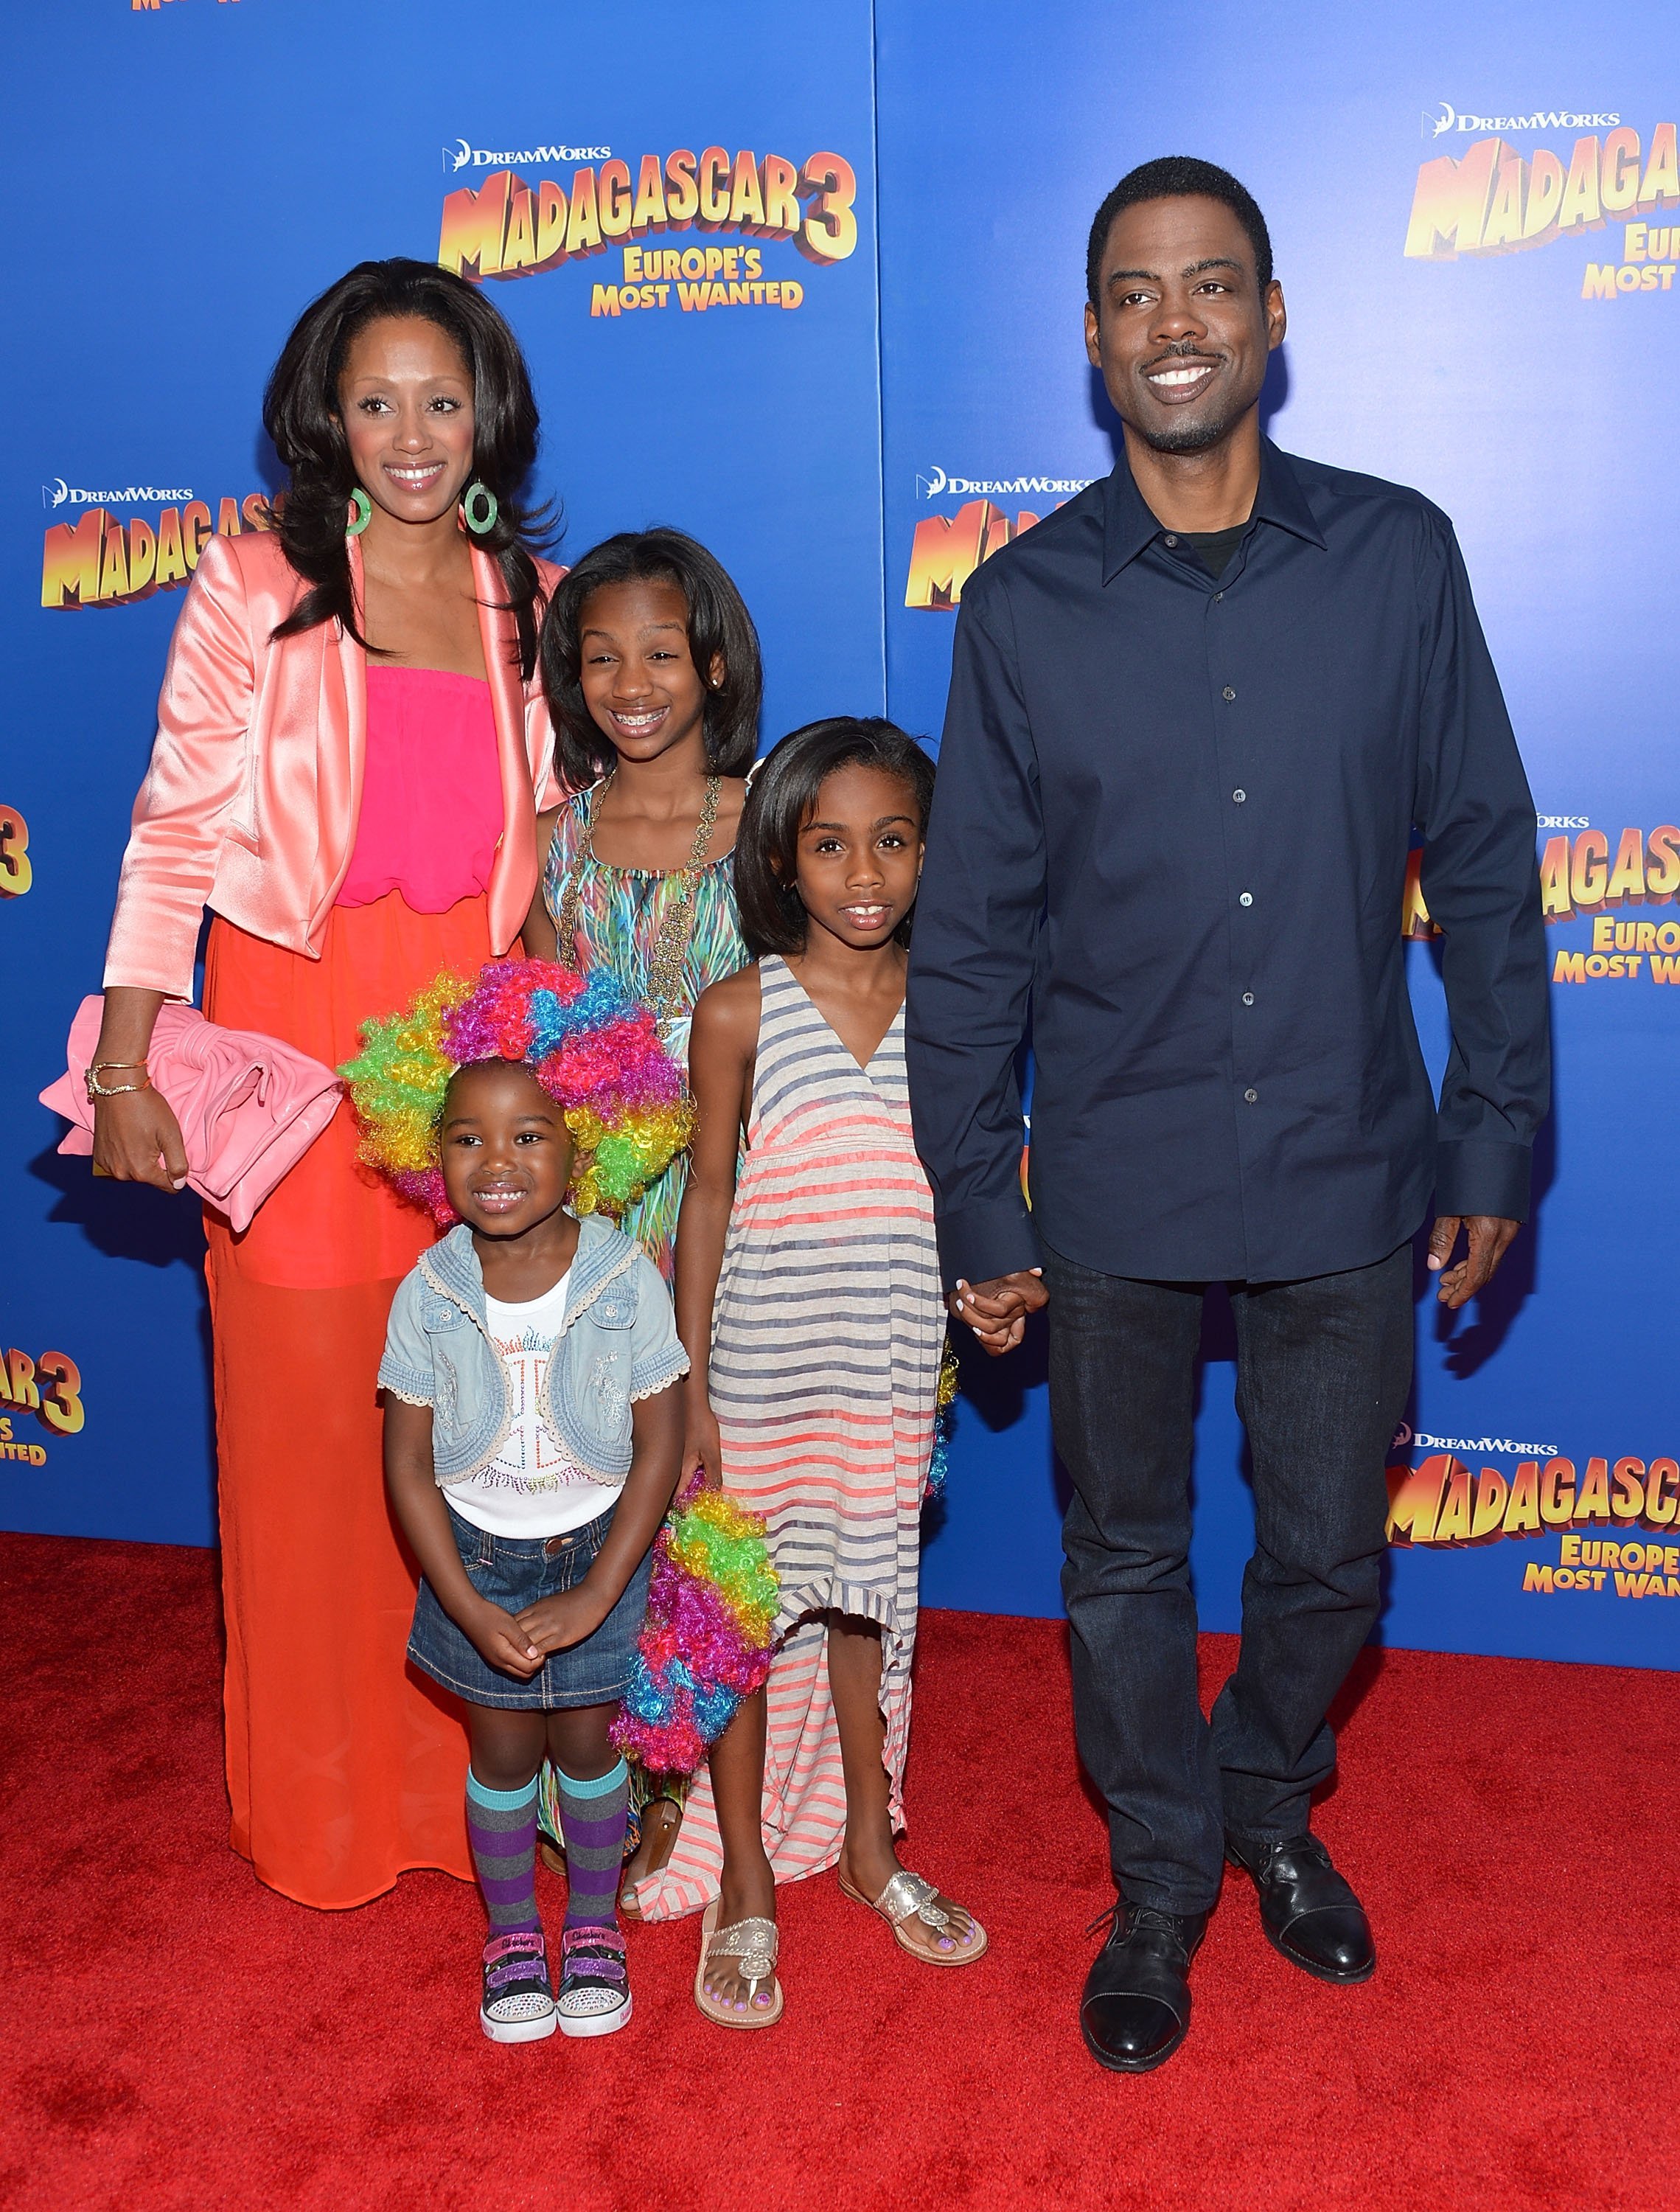 (L-R) Malaak Compton-Rock, Ntombi, Lola, Zahra & Chris Rock at the "Madagascar 3: Europe's Most Wanted" on June 7, 2012 in New York City. |Photo: Getty Images